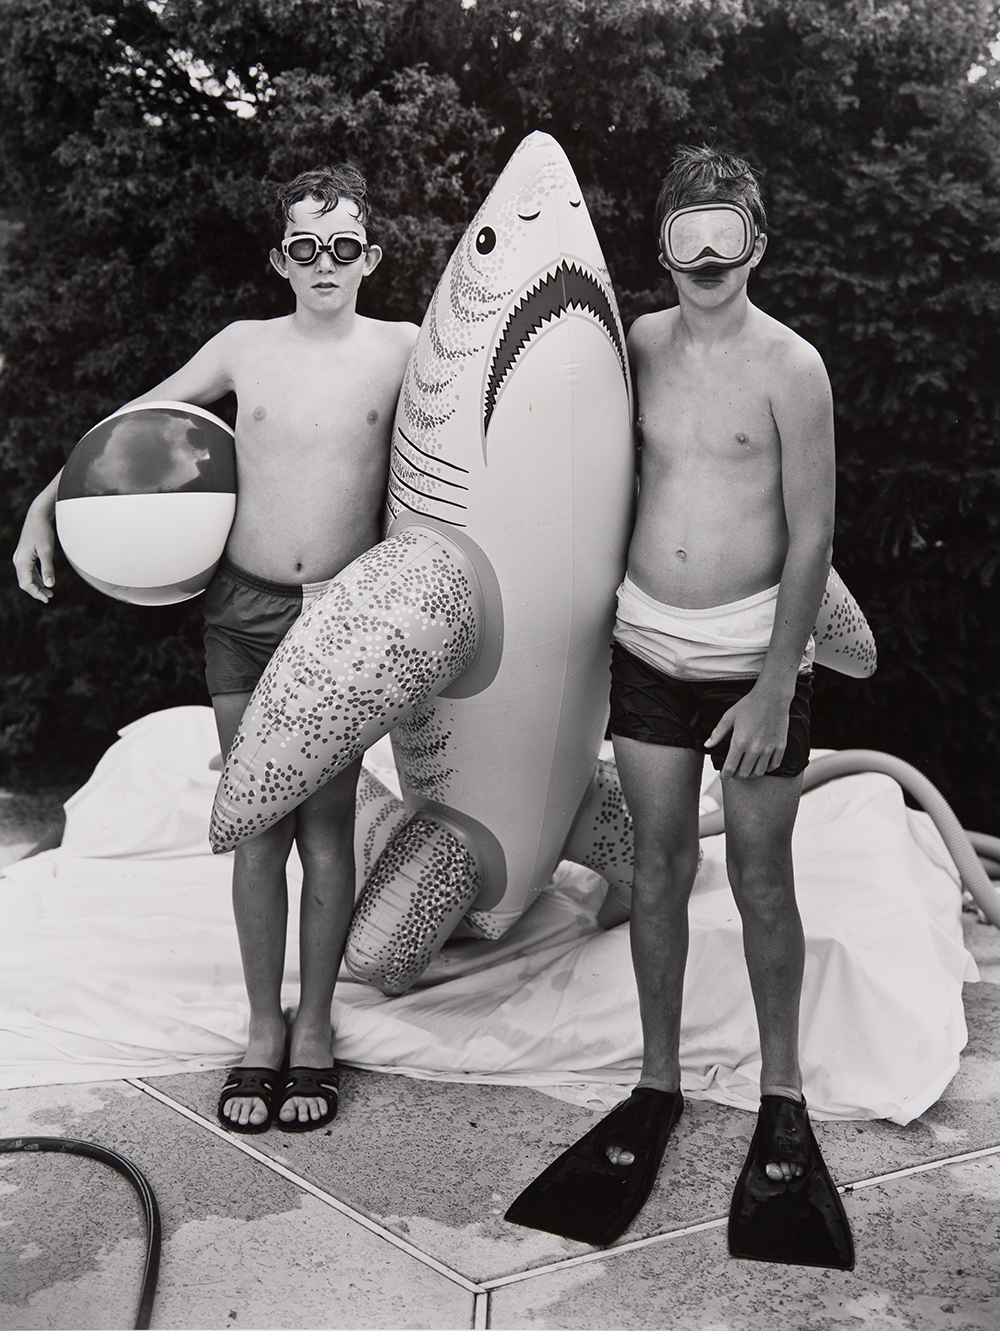 a black and white photograph of two boys standing on a pool deck. There is a blow-up shark between them and one boy is holding a beach ball. The boy on the left has swim goggles on and the boy on the right wears a swimming mask and flippers.